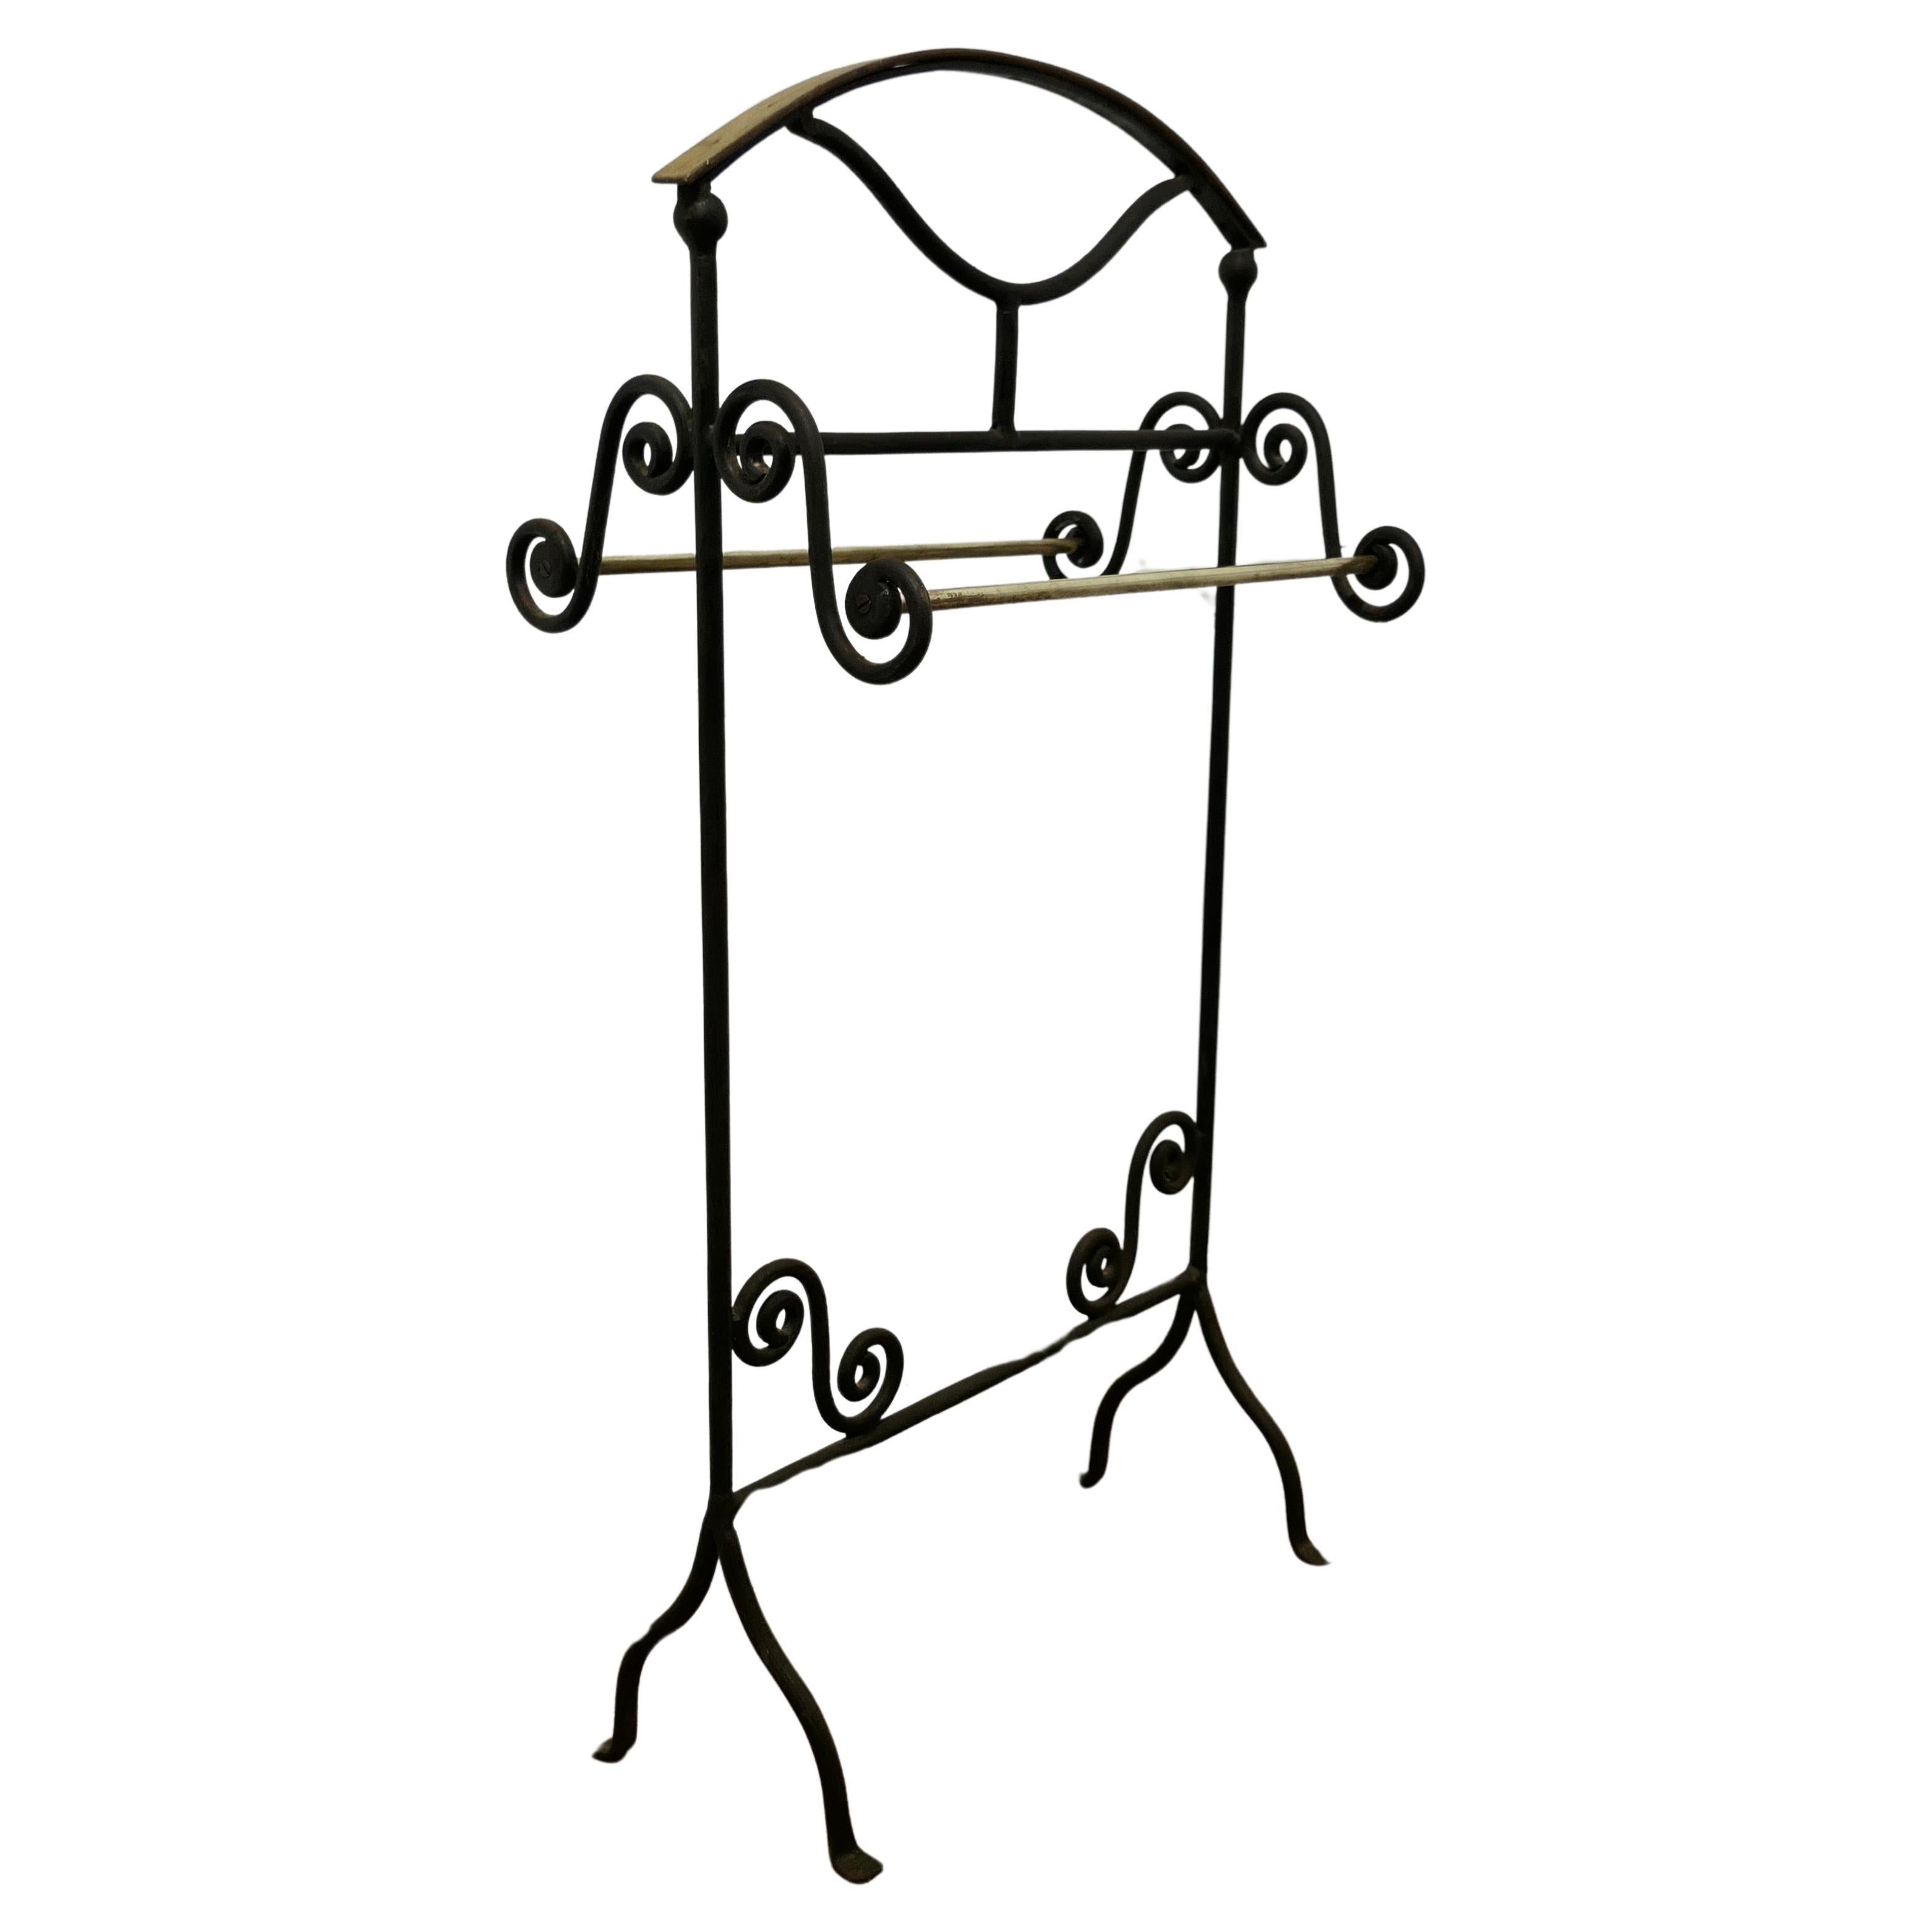 Wrought Iron Towel Rail or Clothes Airer  The Towel Rail or Clothes Airer has pr